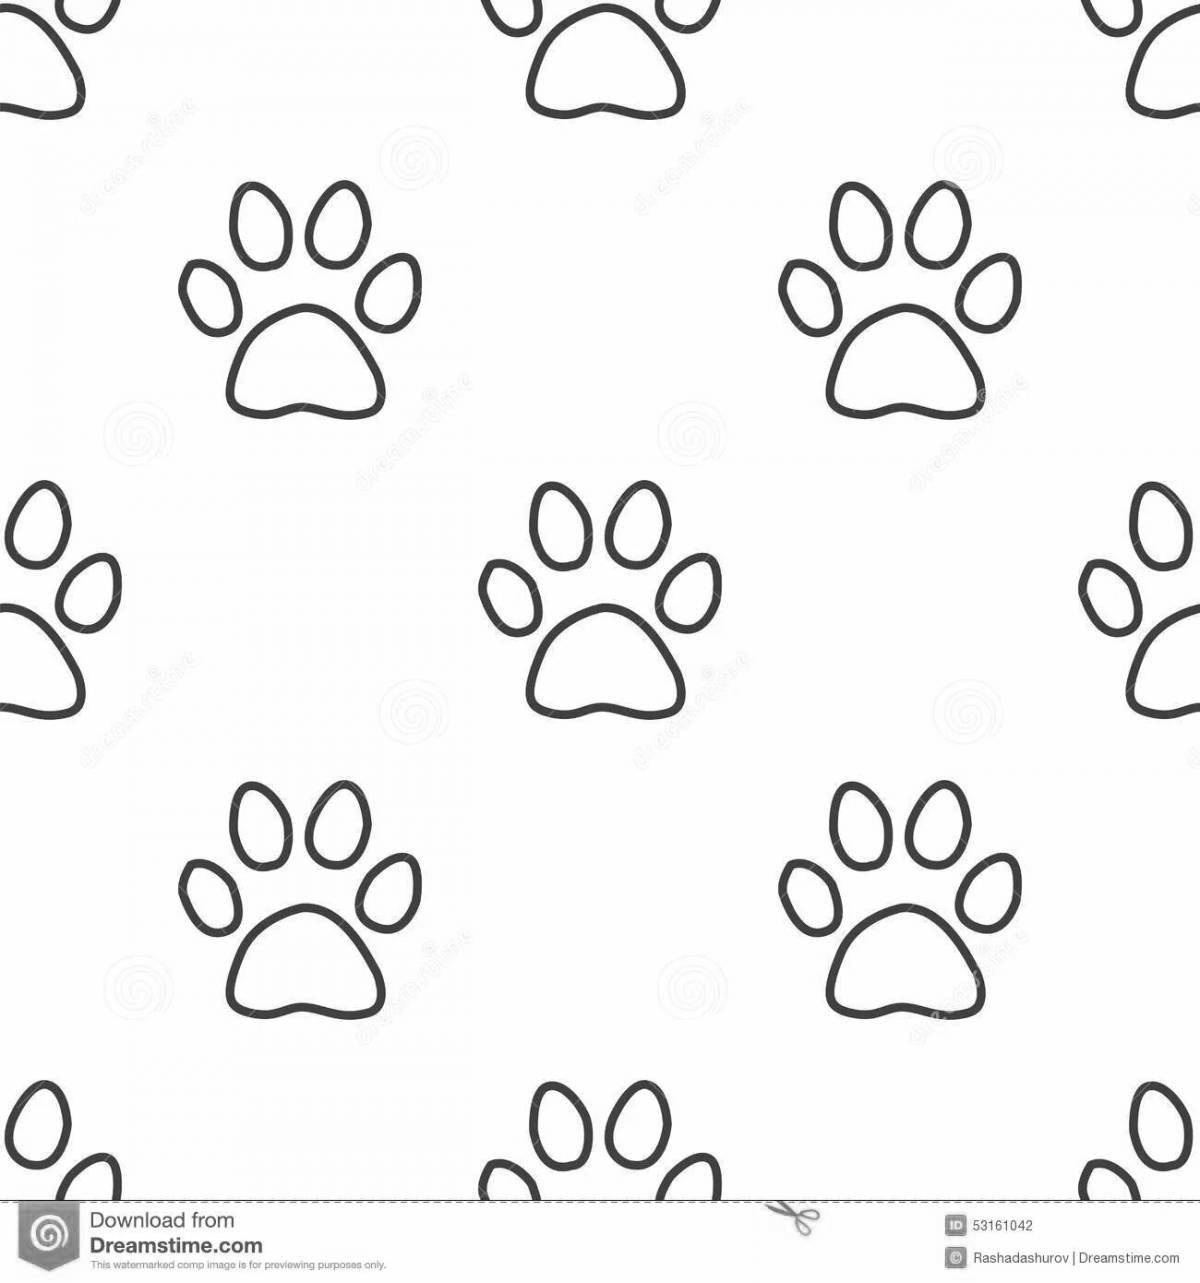 Coloring book bright cat's paw